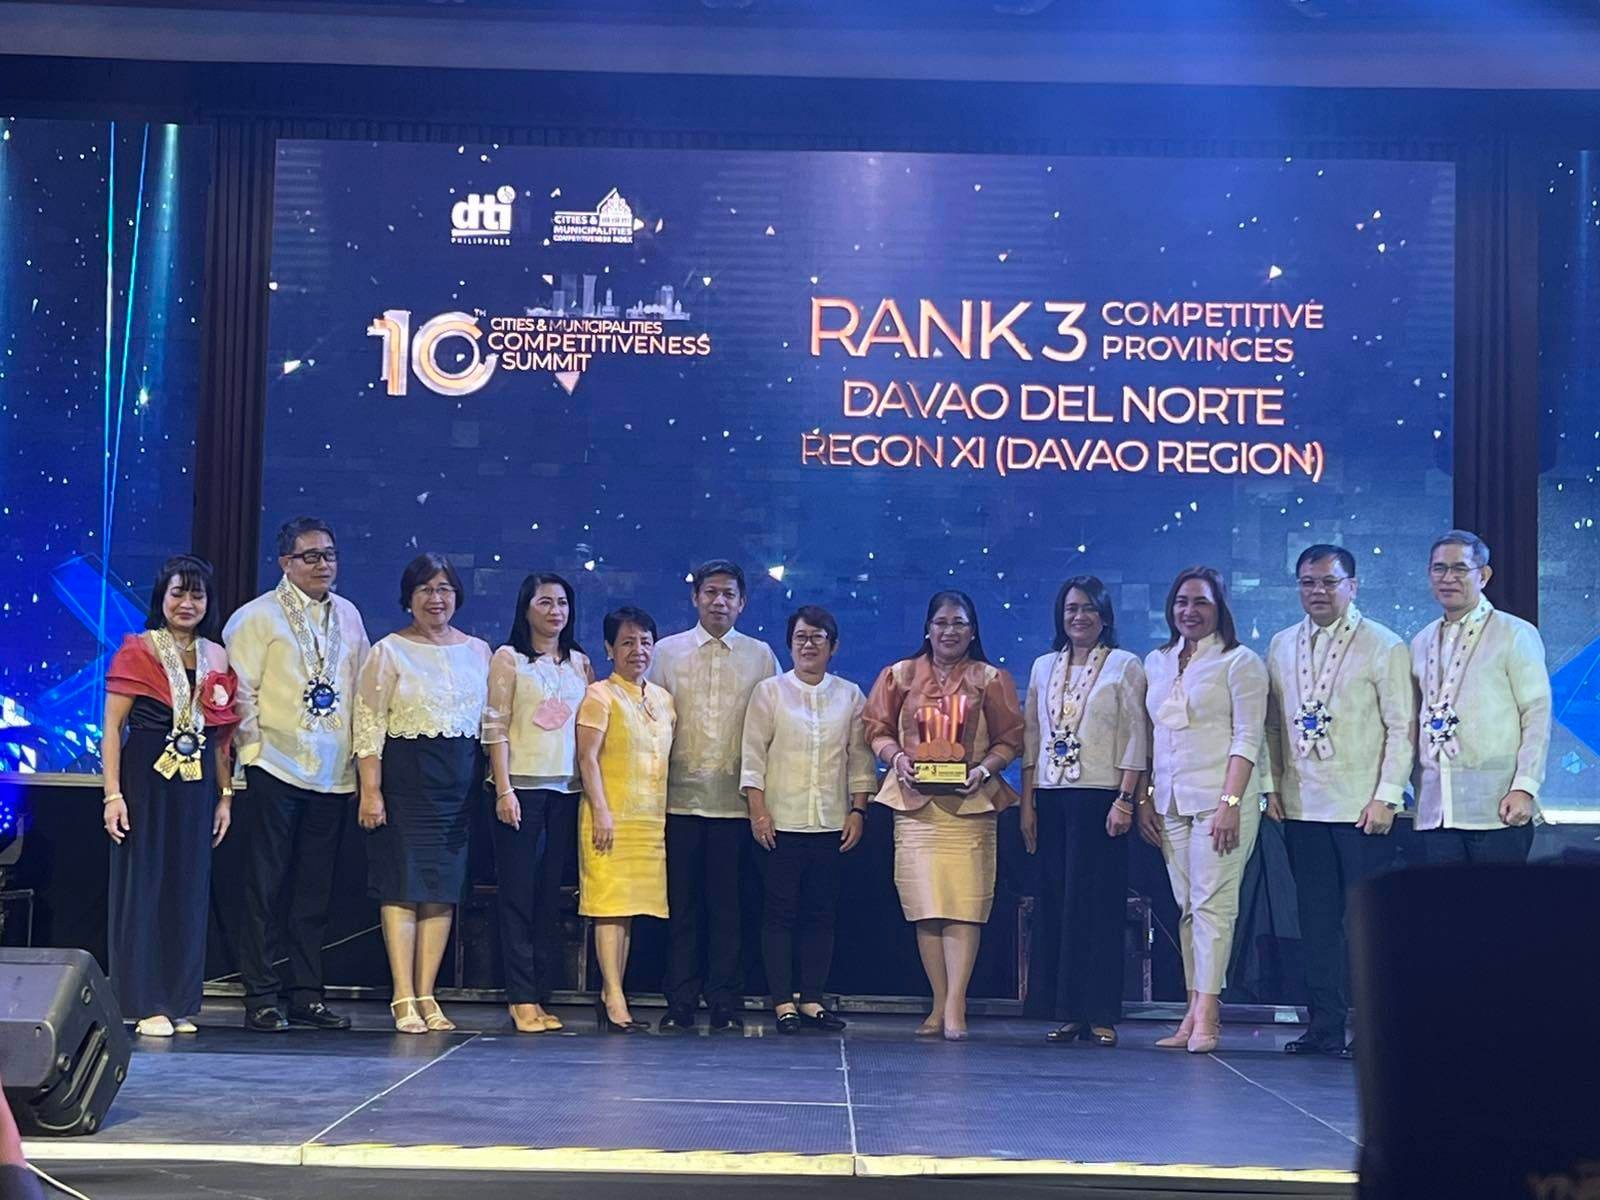 Provincial Administrator Engr. Josie Jean Rabanoz, center, receives the award recognizing Davao del Norte as 3rd Most Competitive Province in the country.